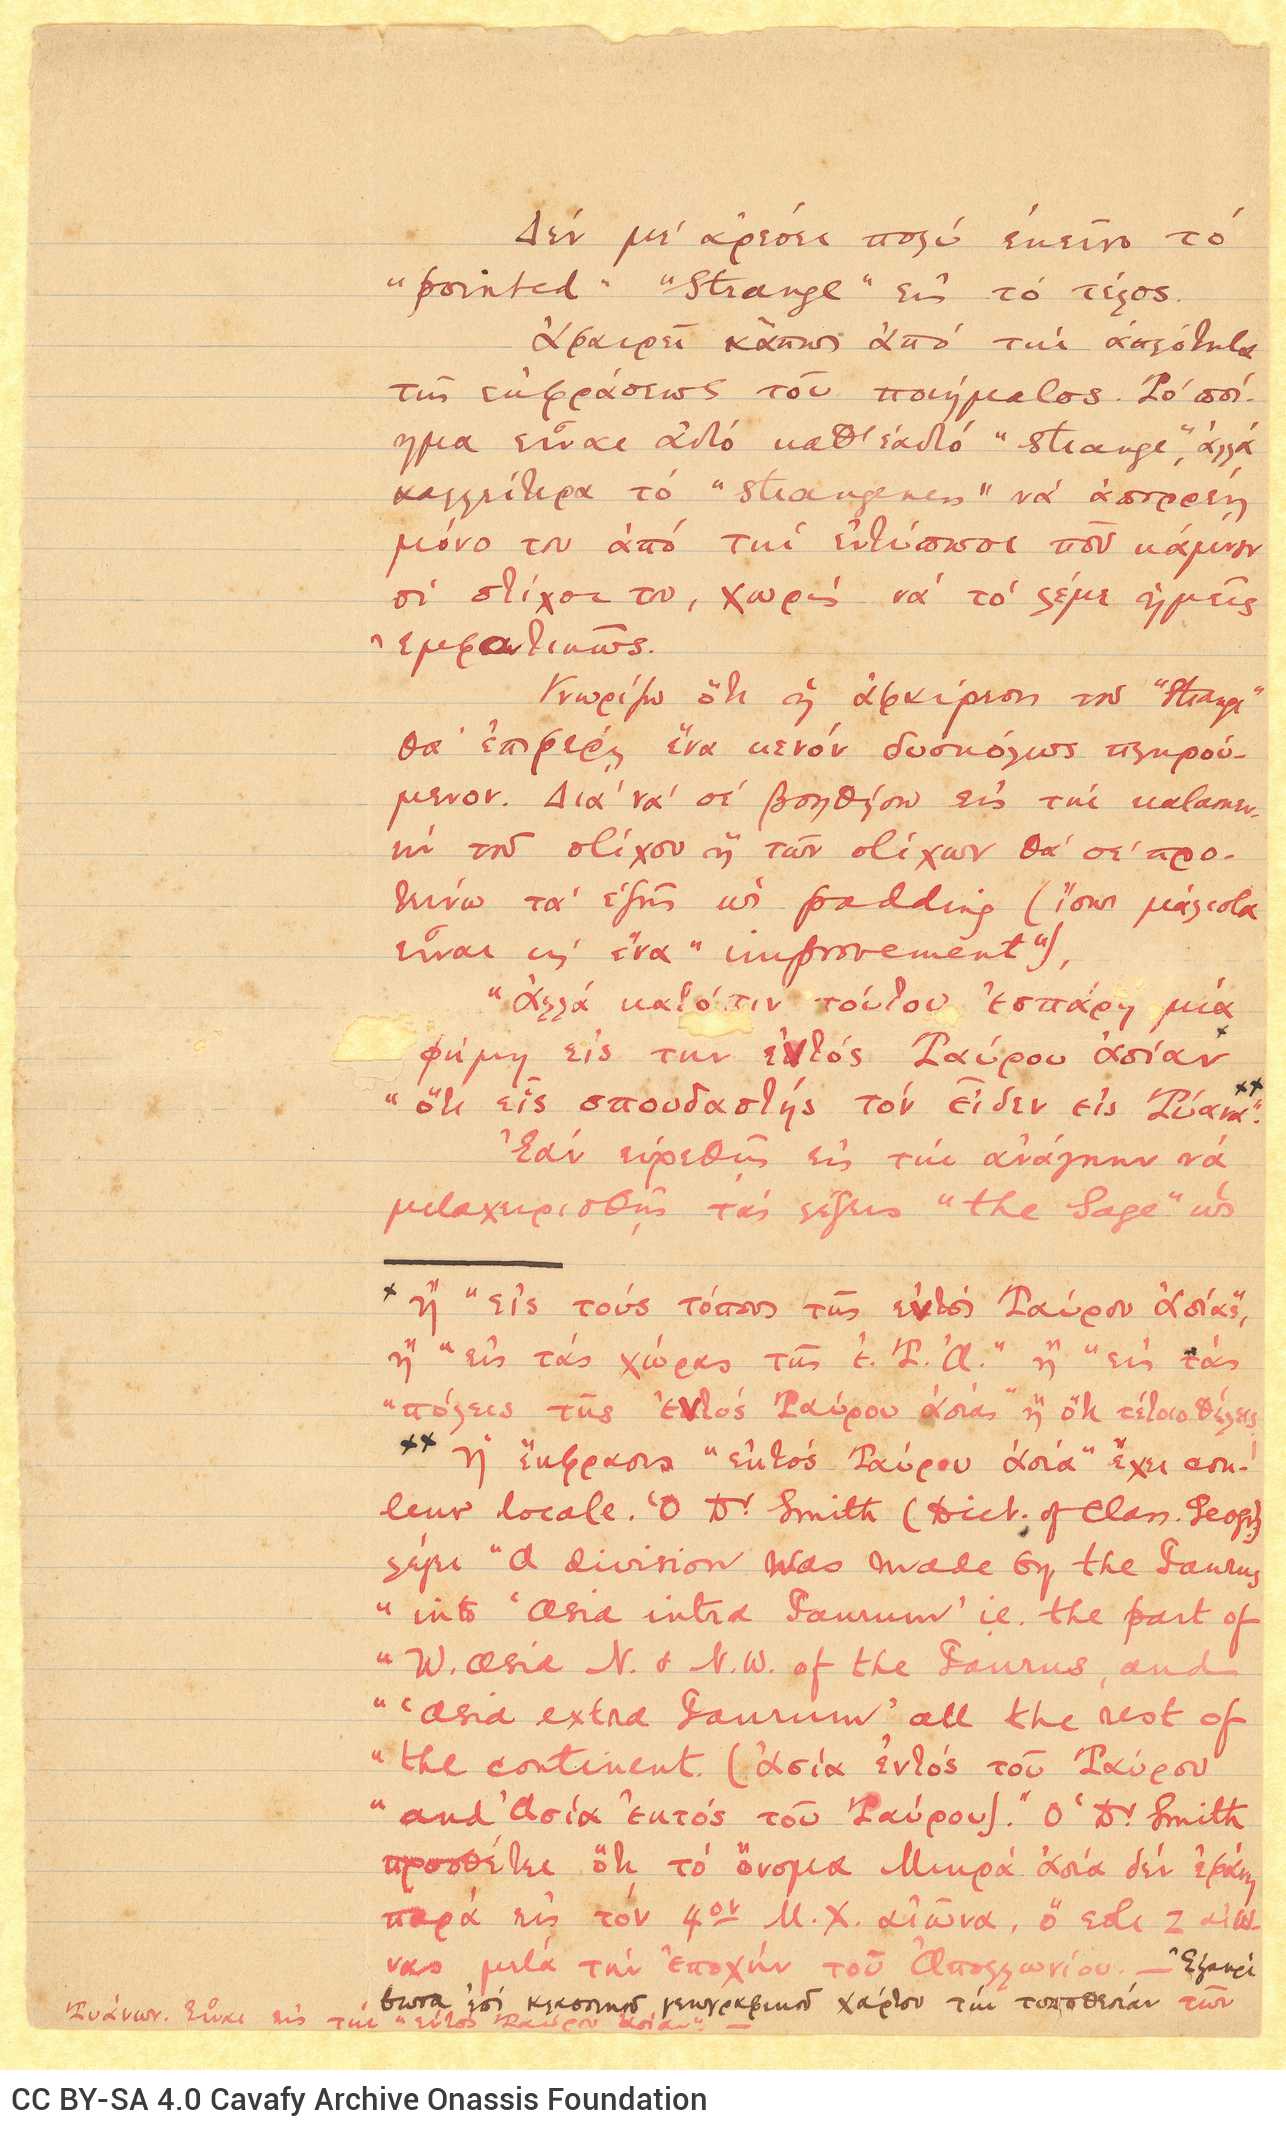 Handwritten text by Cavafy on both sides of a ruled sheet. Use of English words. Extensive footnote on the first page. The